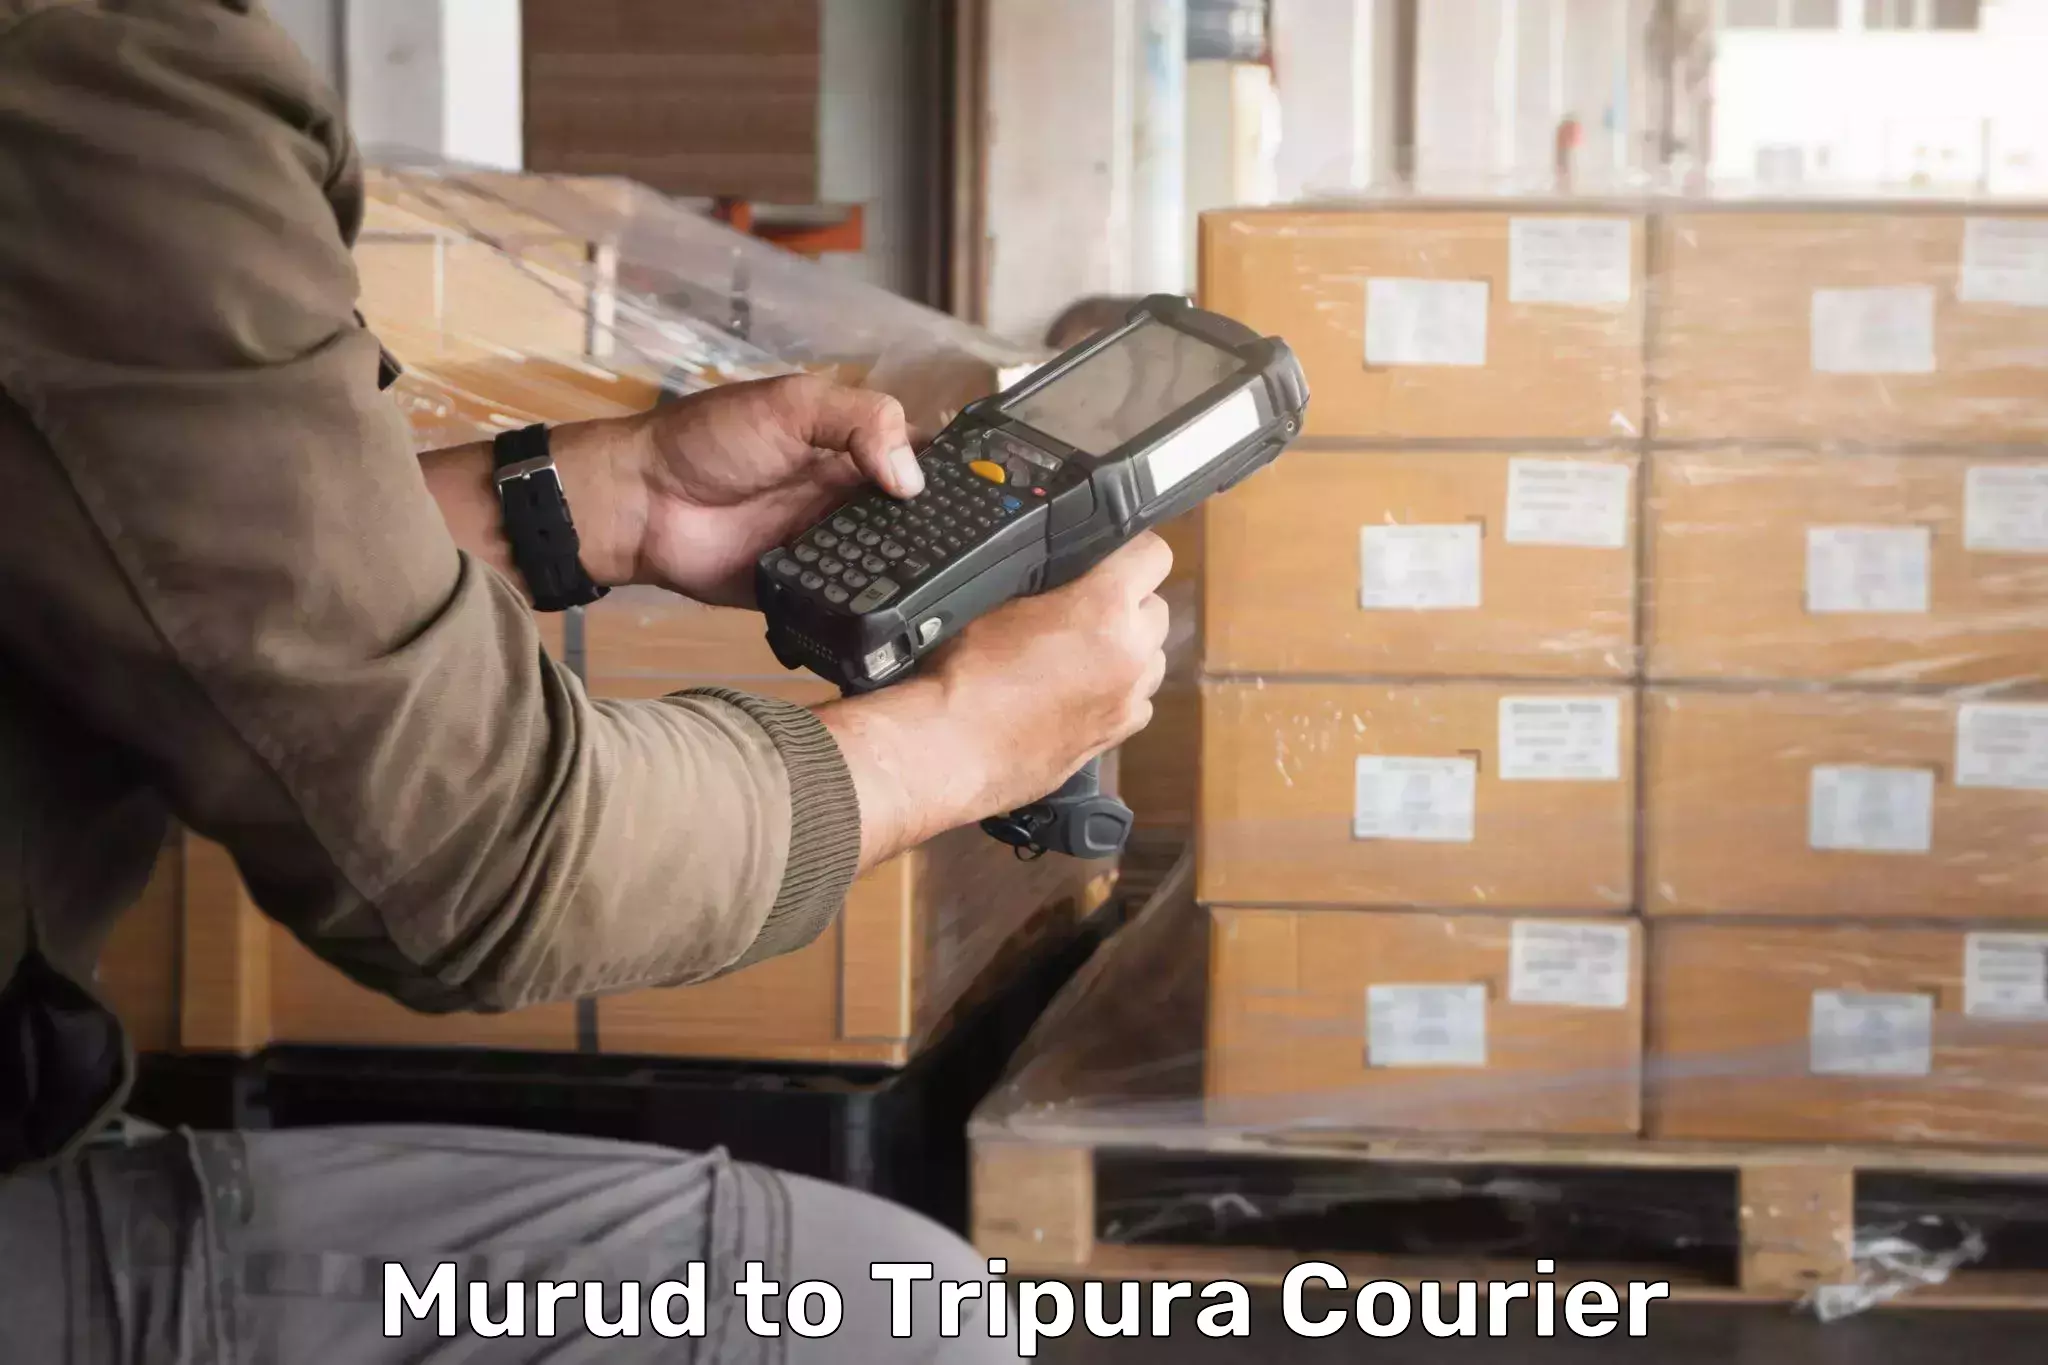 Efficient courier operations Murud to Tripura